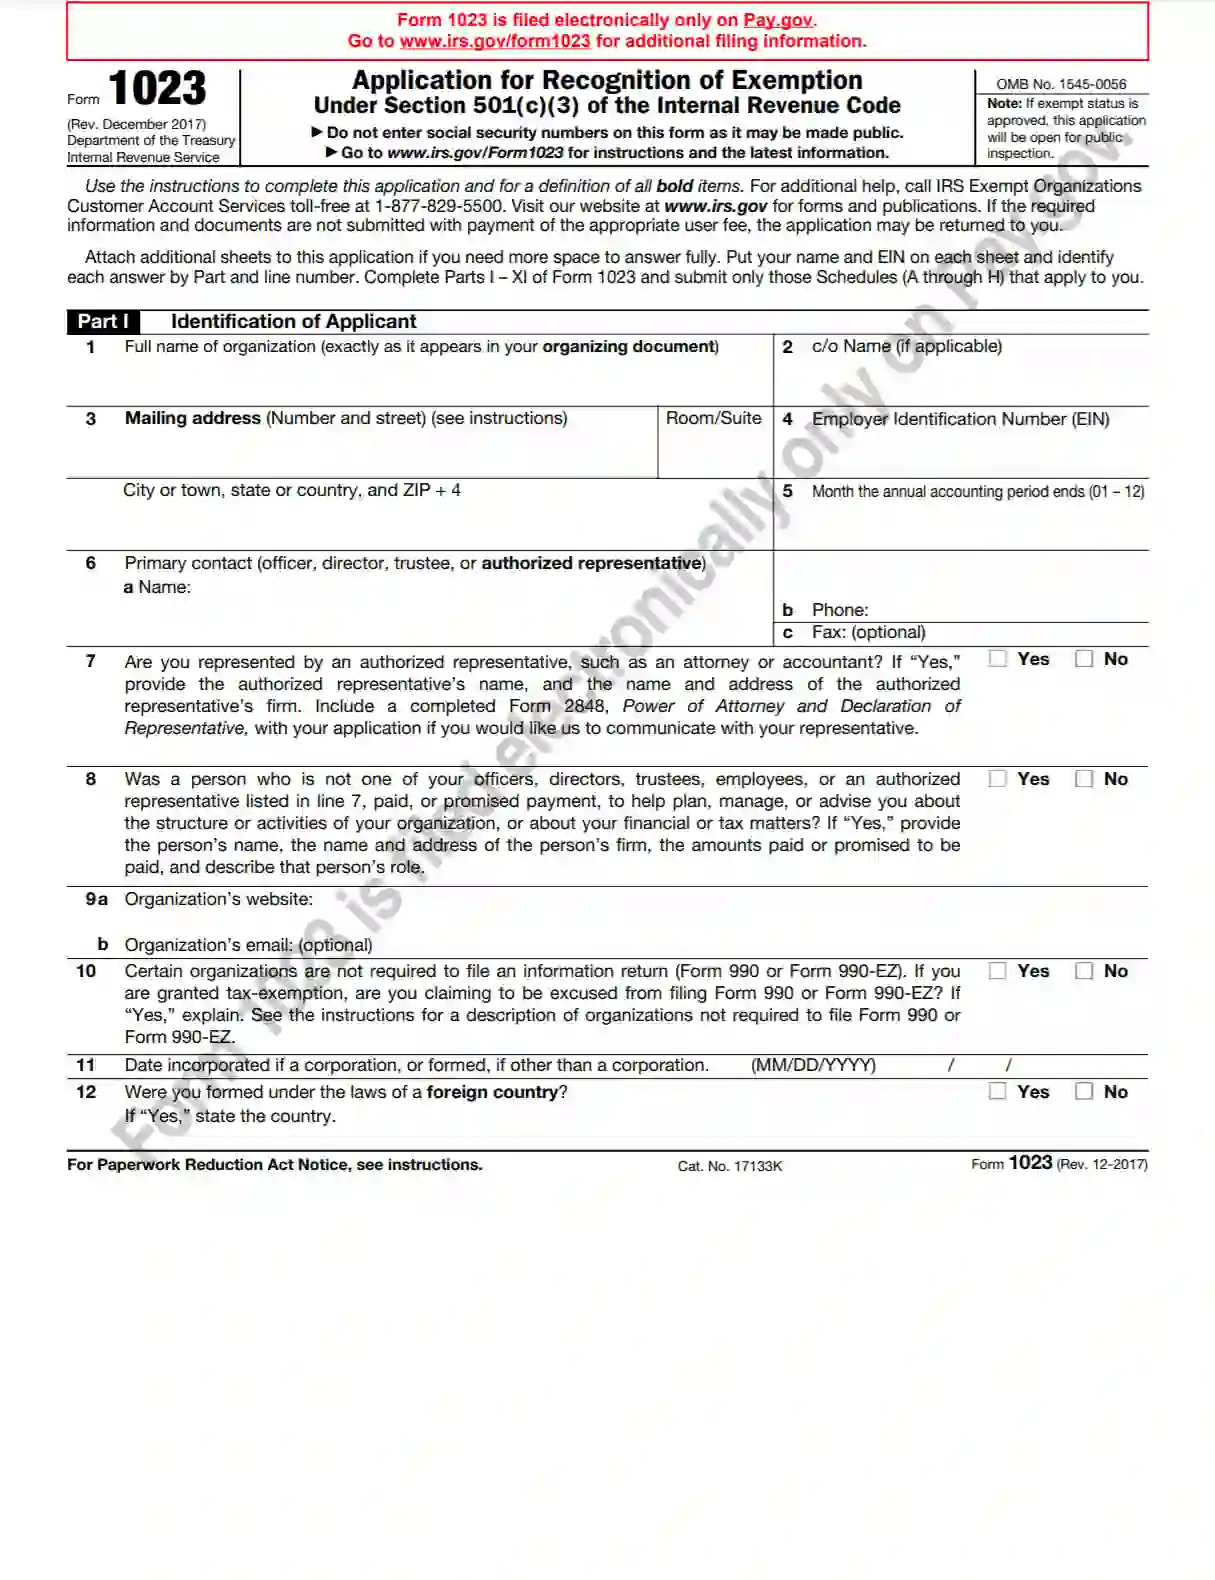 irs-form-1023-fill-out-printable-pdf-forms-online